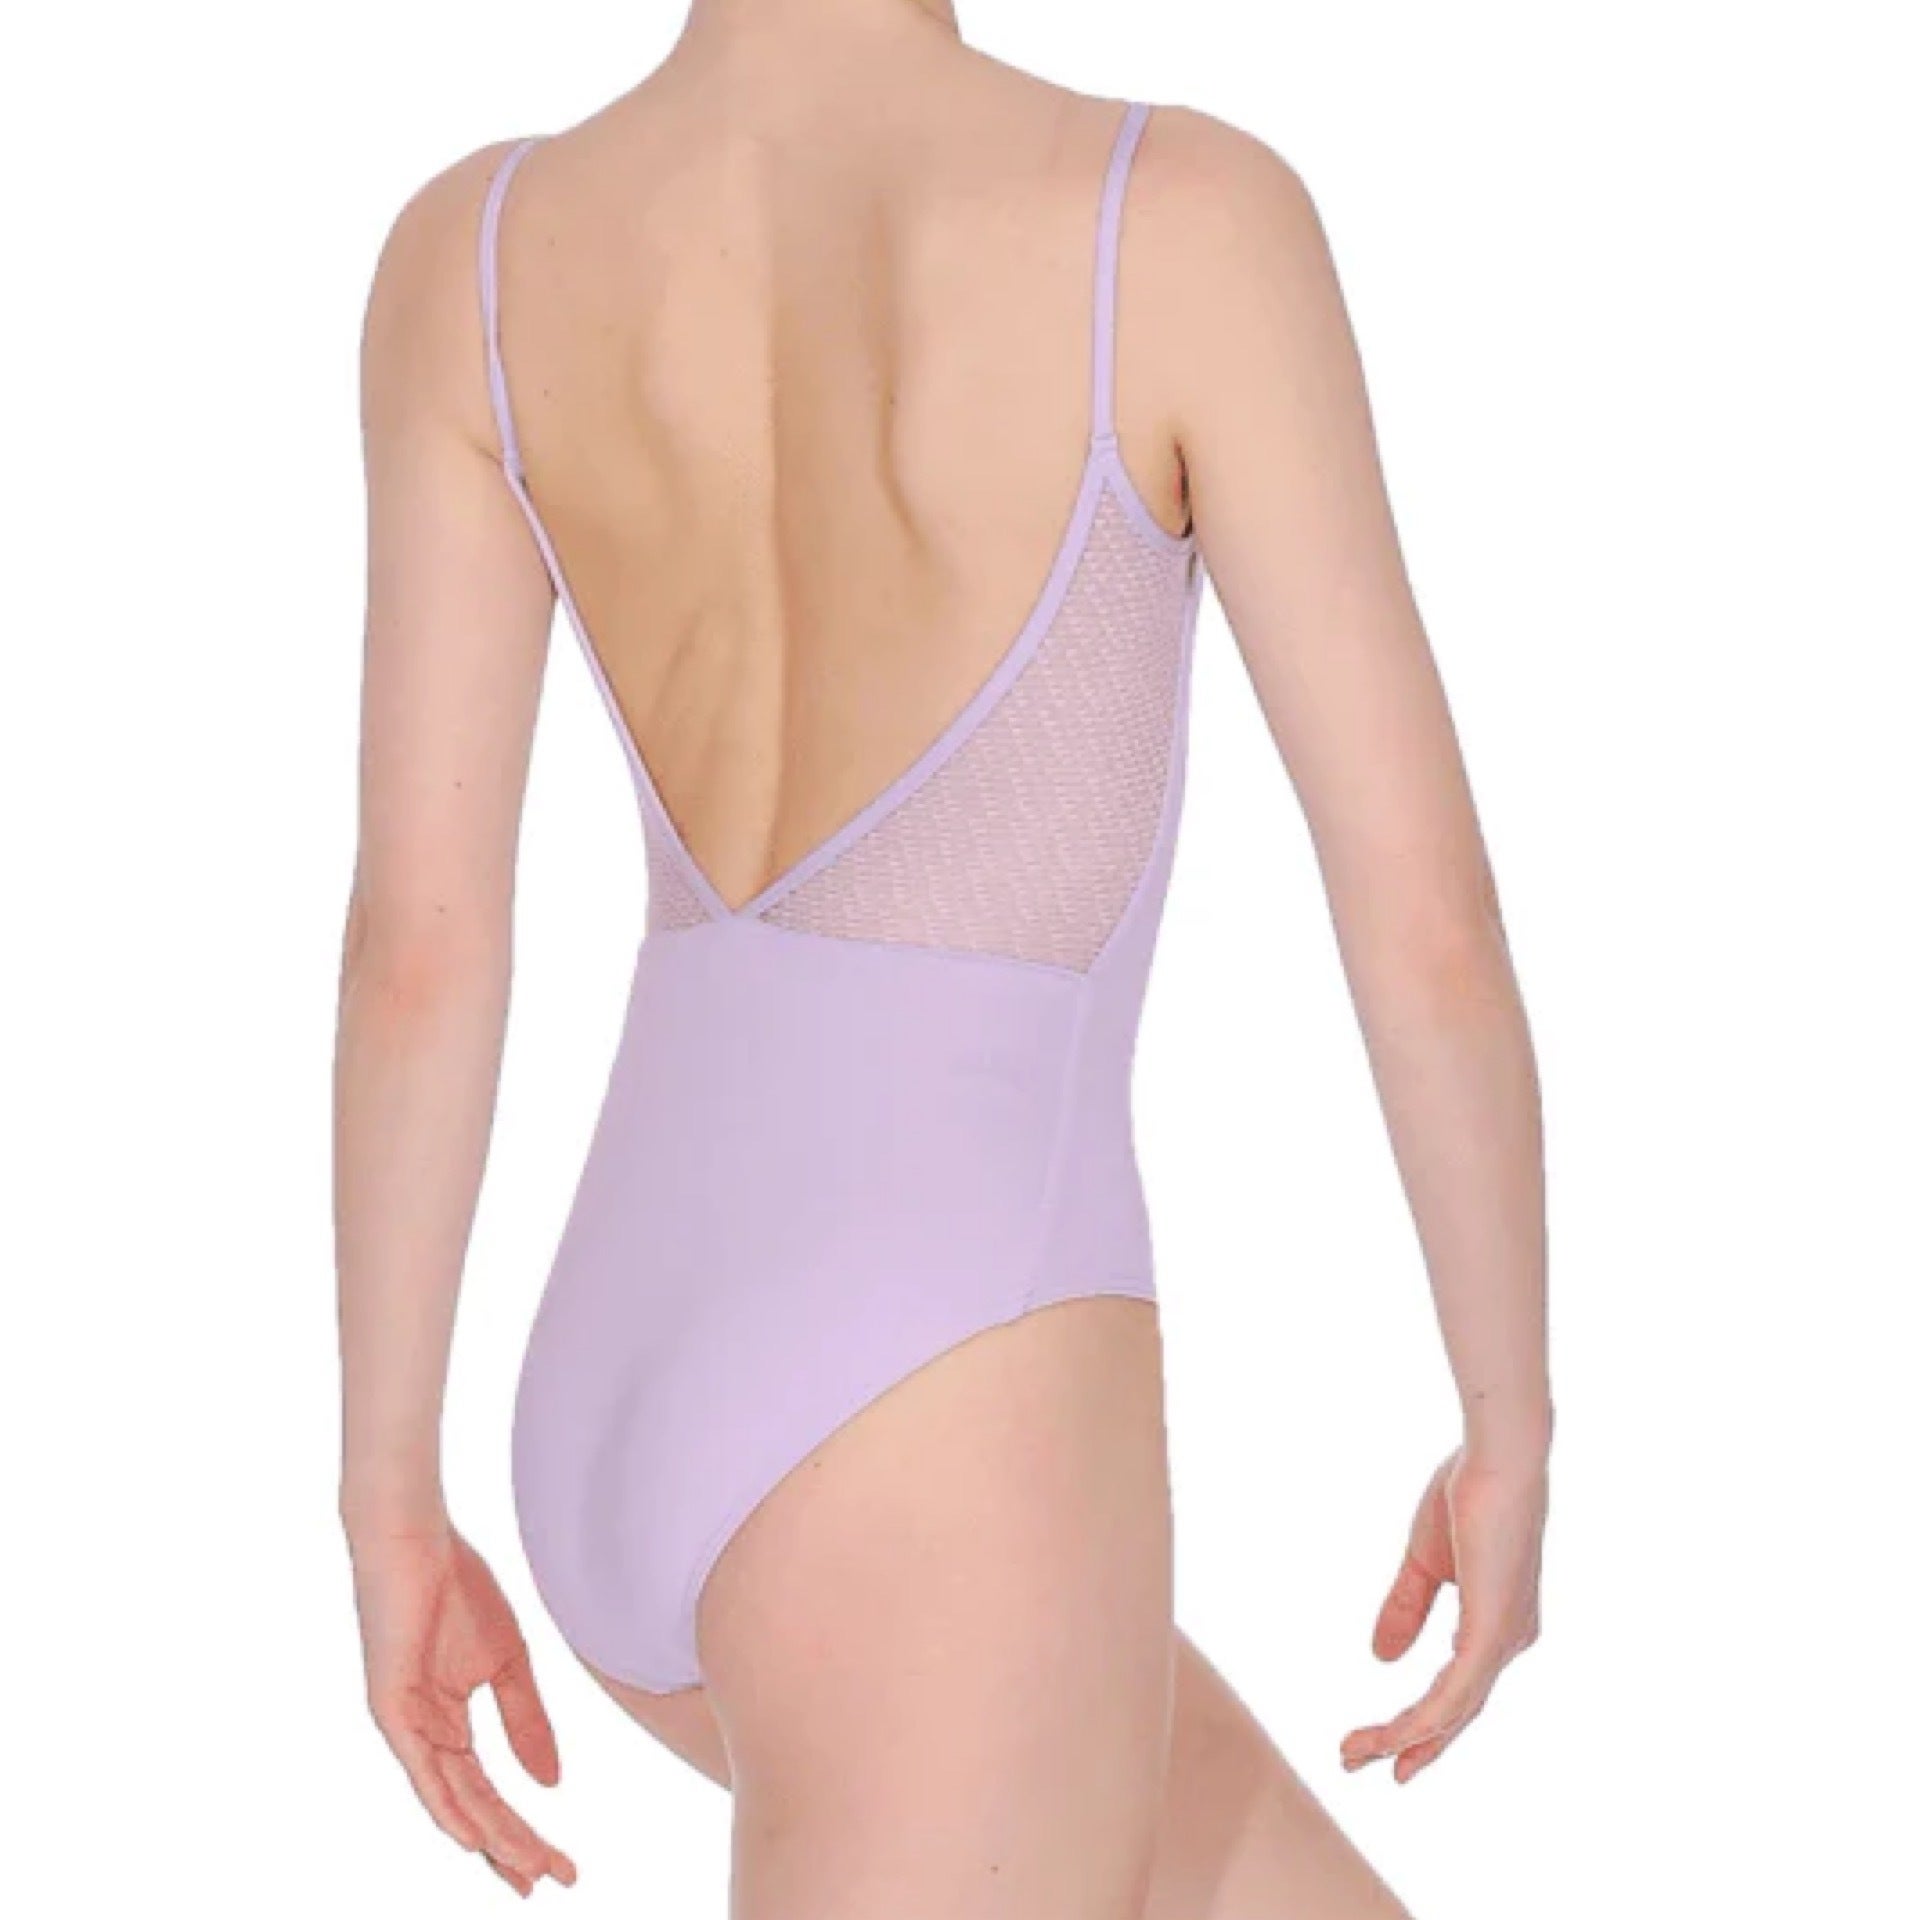 Women's Leotards and Bodysuits Clearance Sale